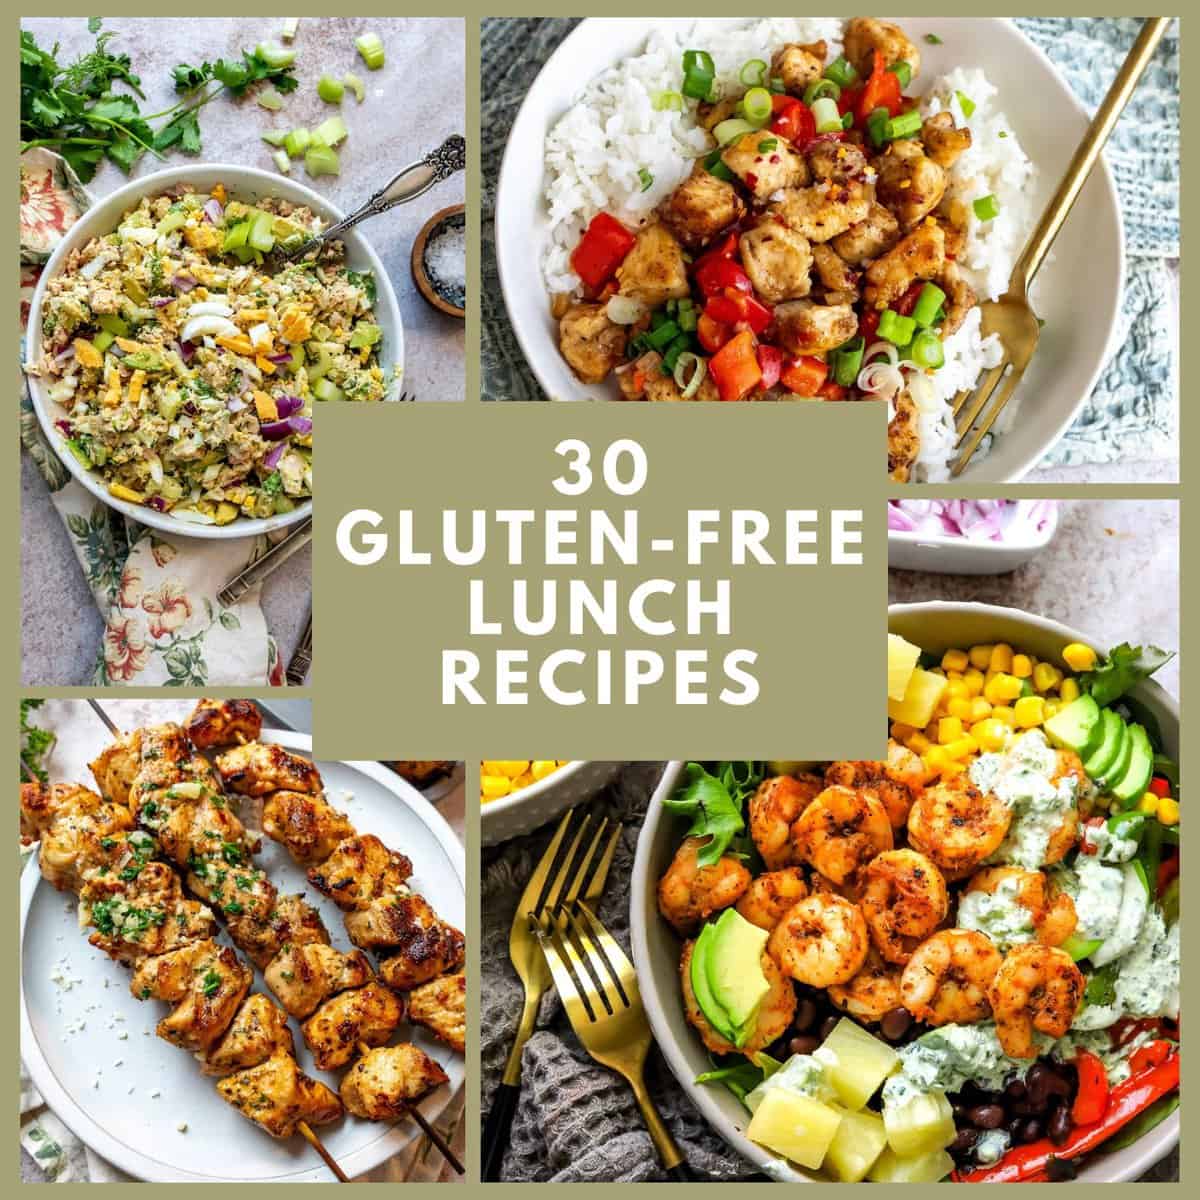 A collage featuring gluten free lunch recipes.